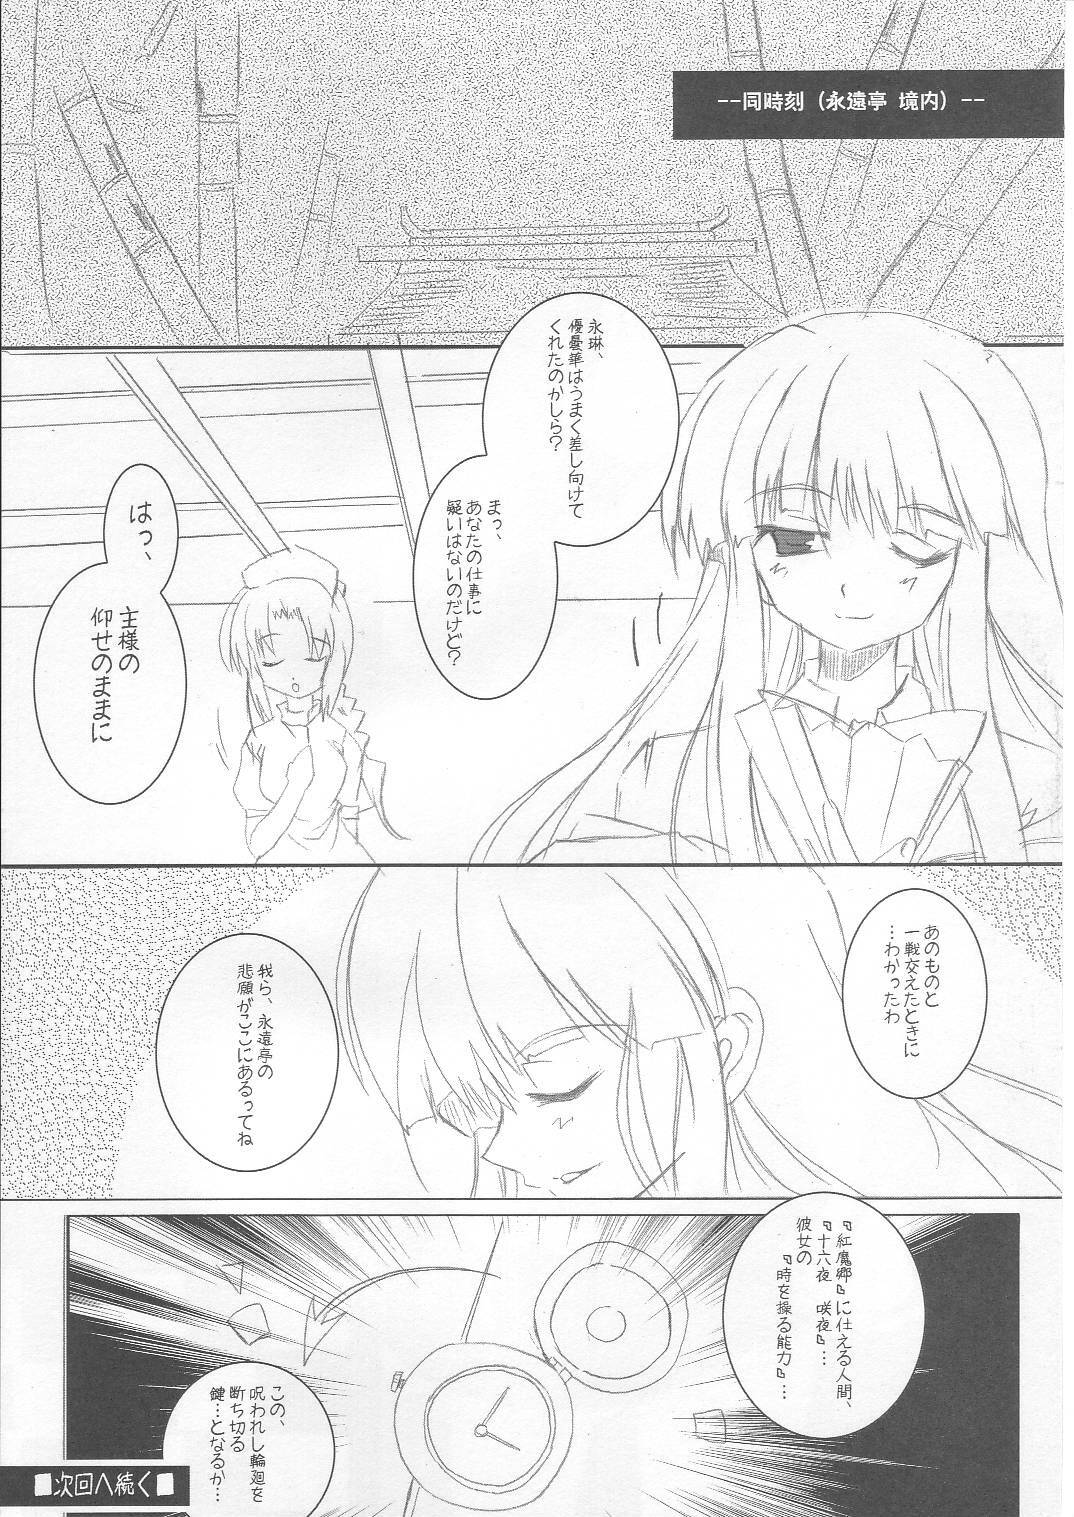 (SC30) [HappyBirthday (Maruchan., Monchy)] REDEMPTION (Touhou Project) page 8 full